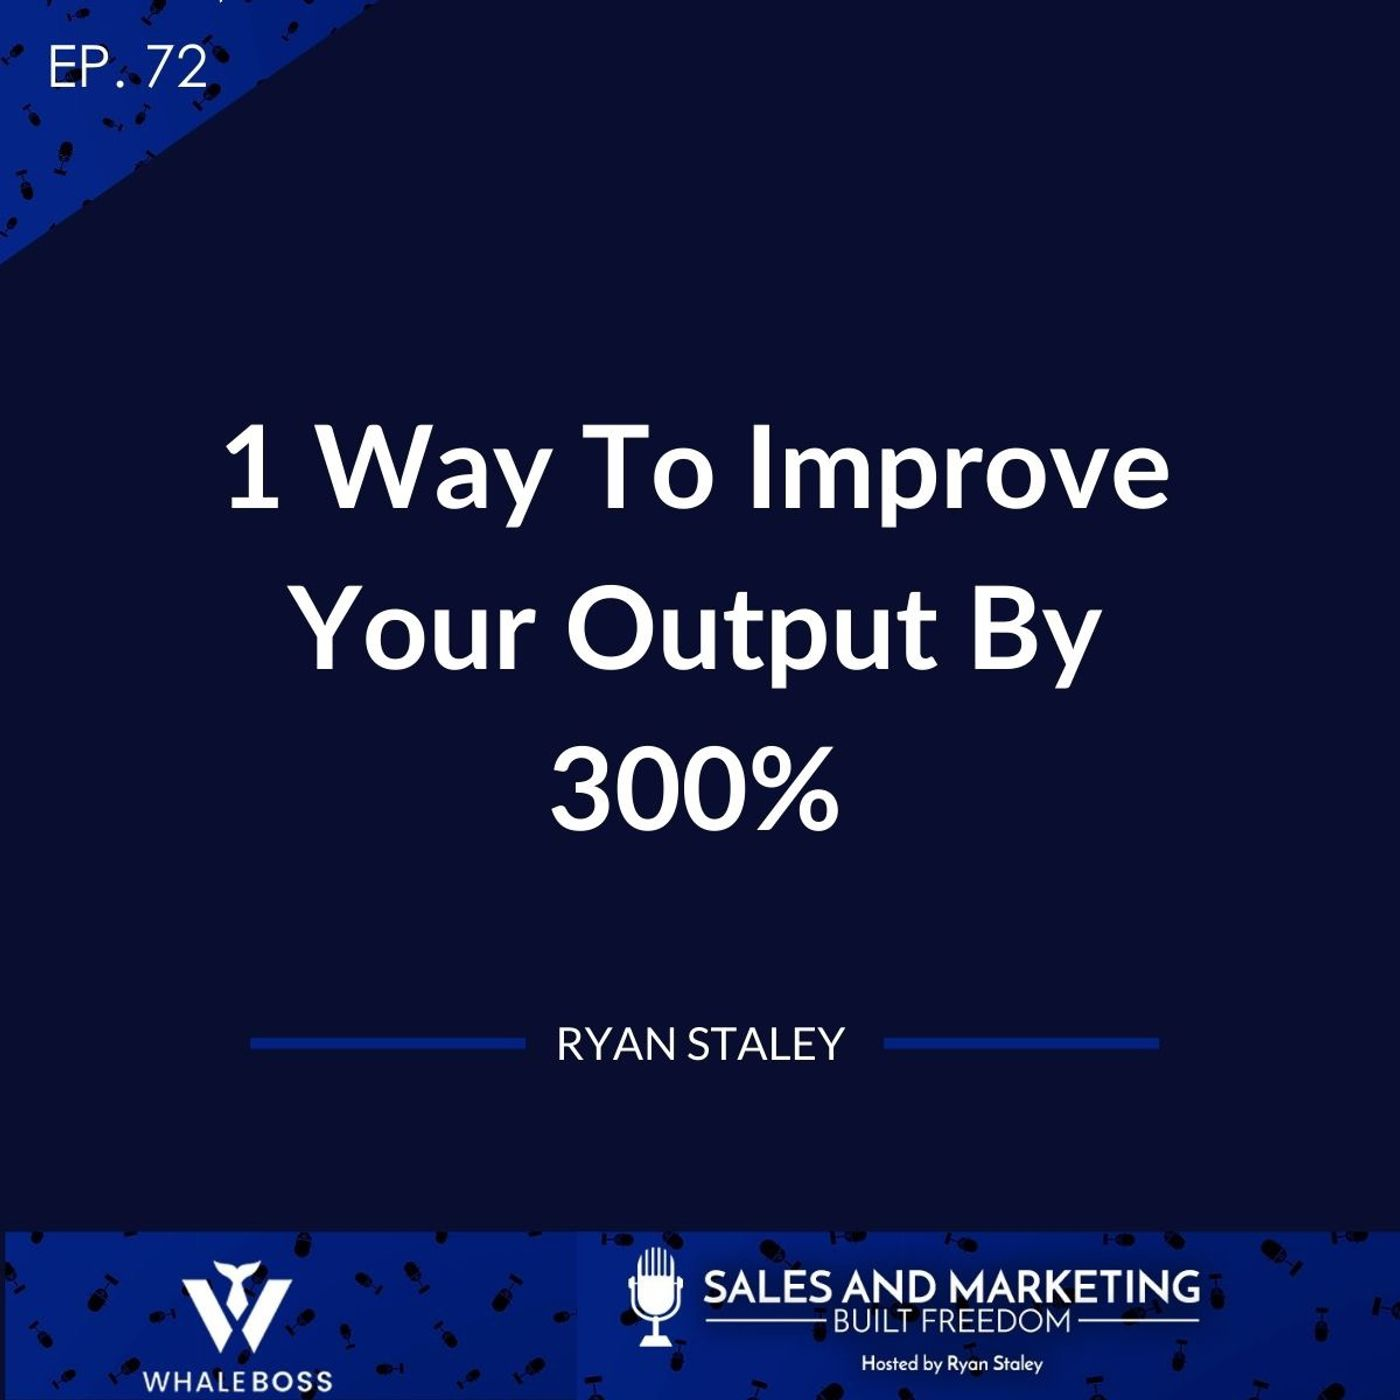 How To Improve Your Output By 300% (For Business & Marketing Scale - Growth)